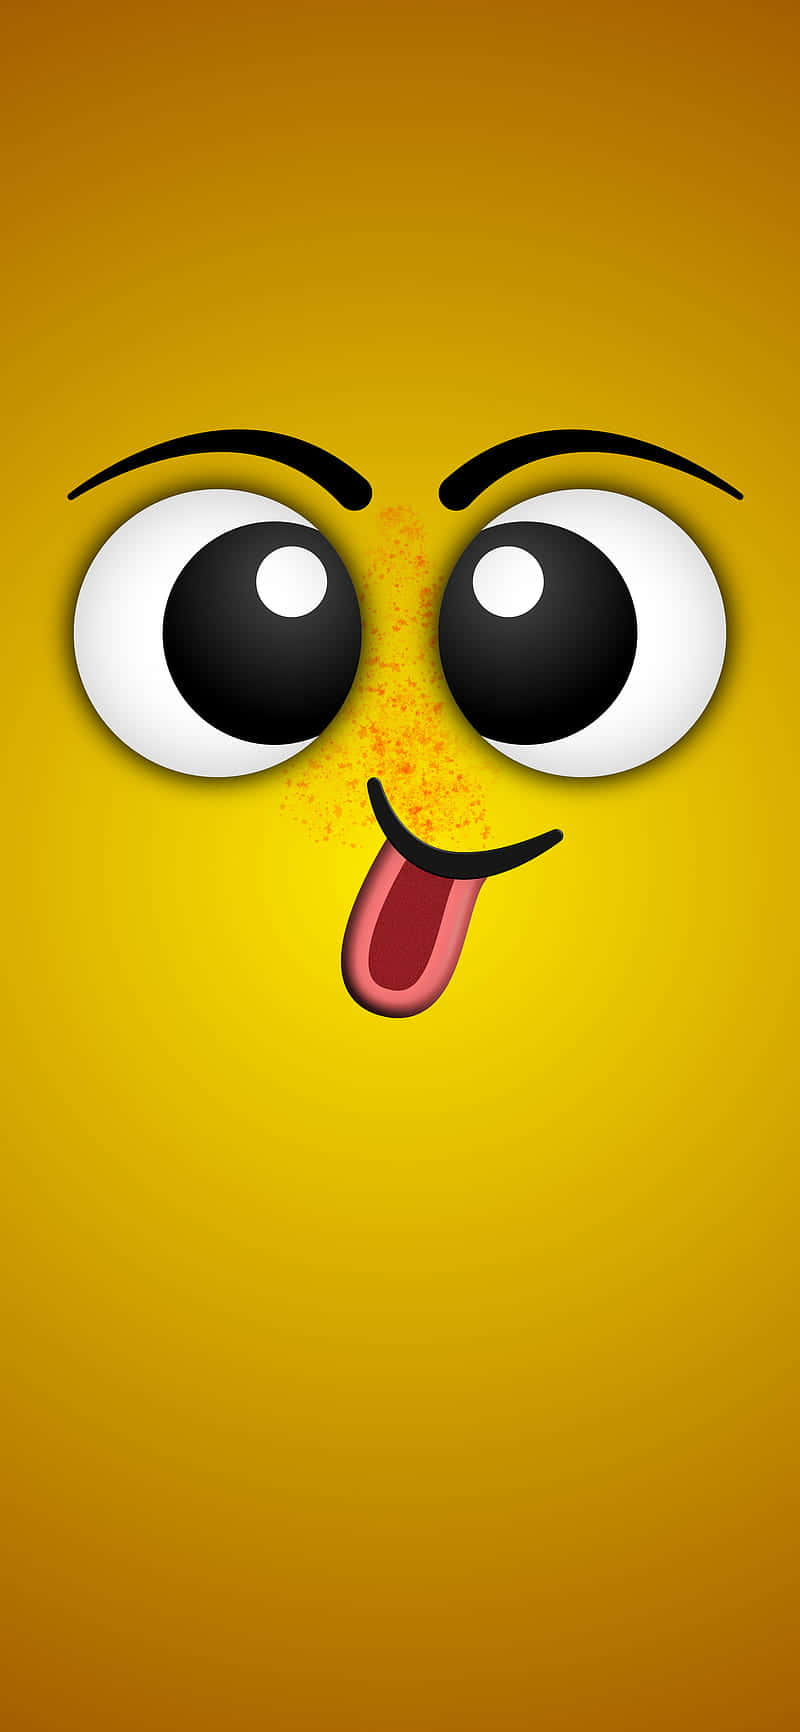 Naughty Face Iphone Wallpaper